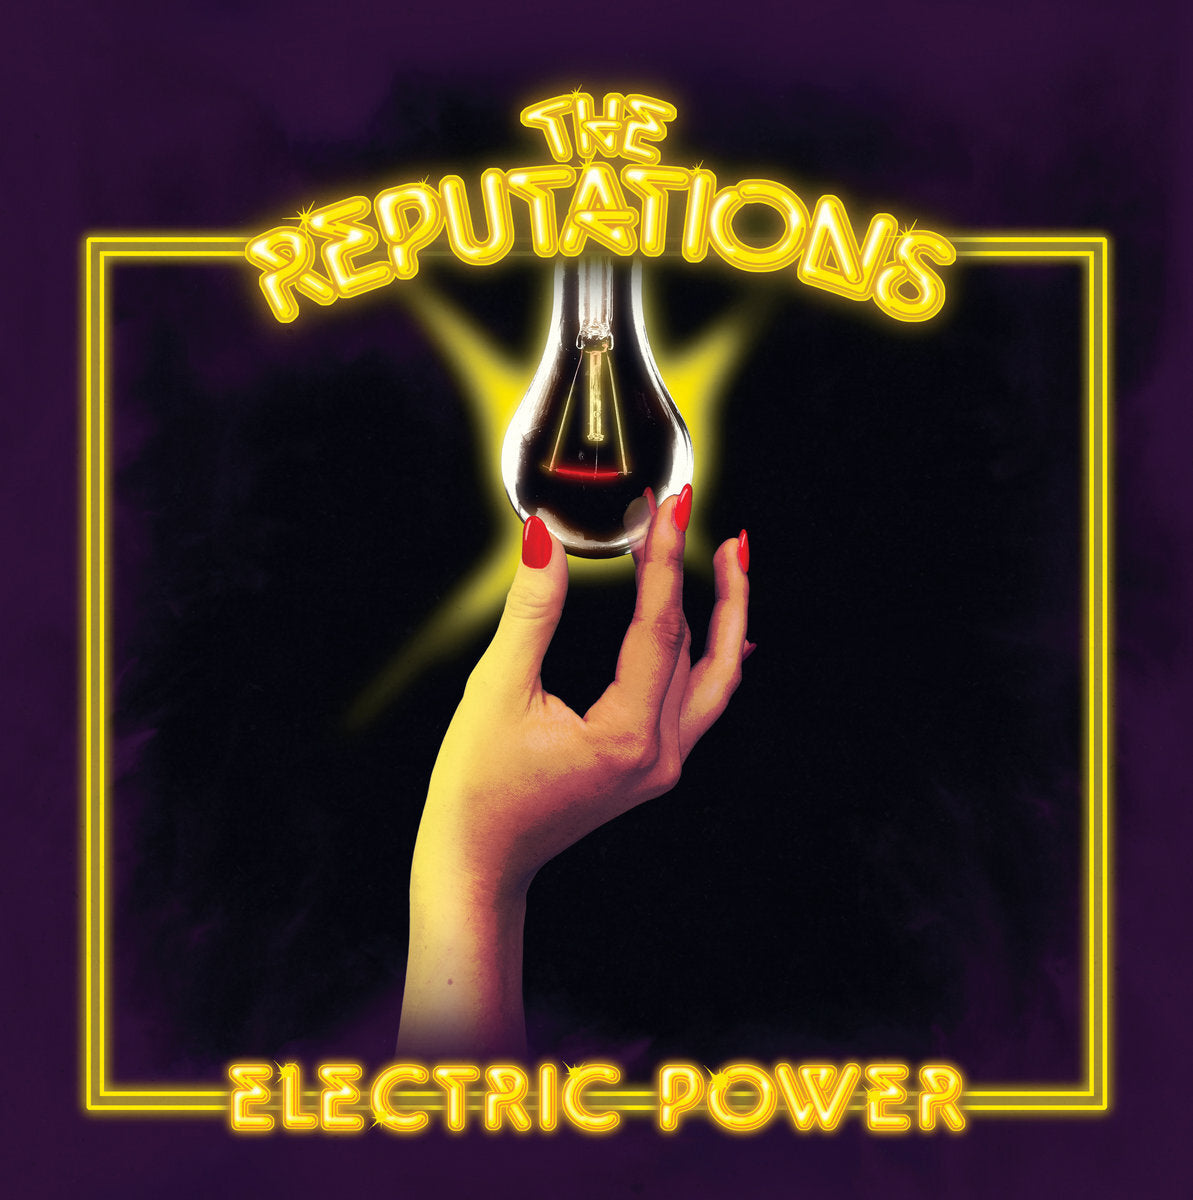 Reputations, The "Electric Power"